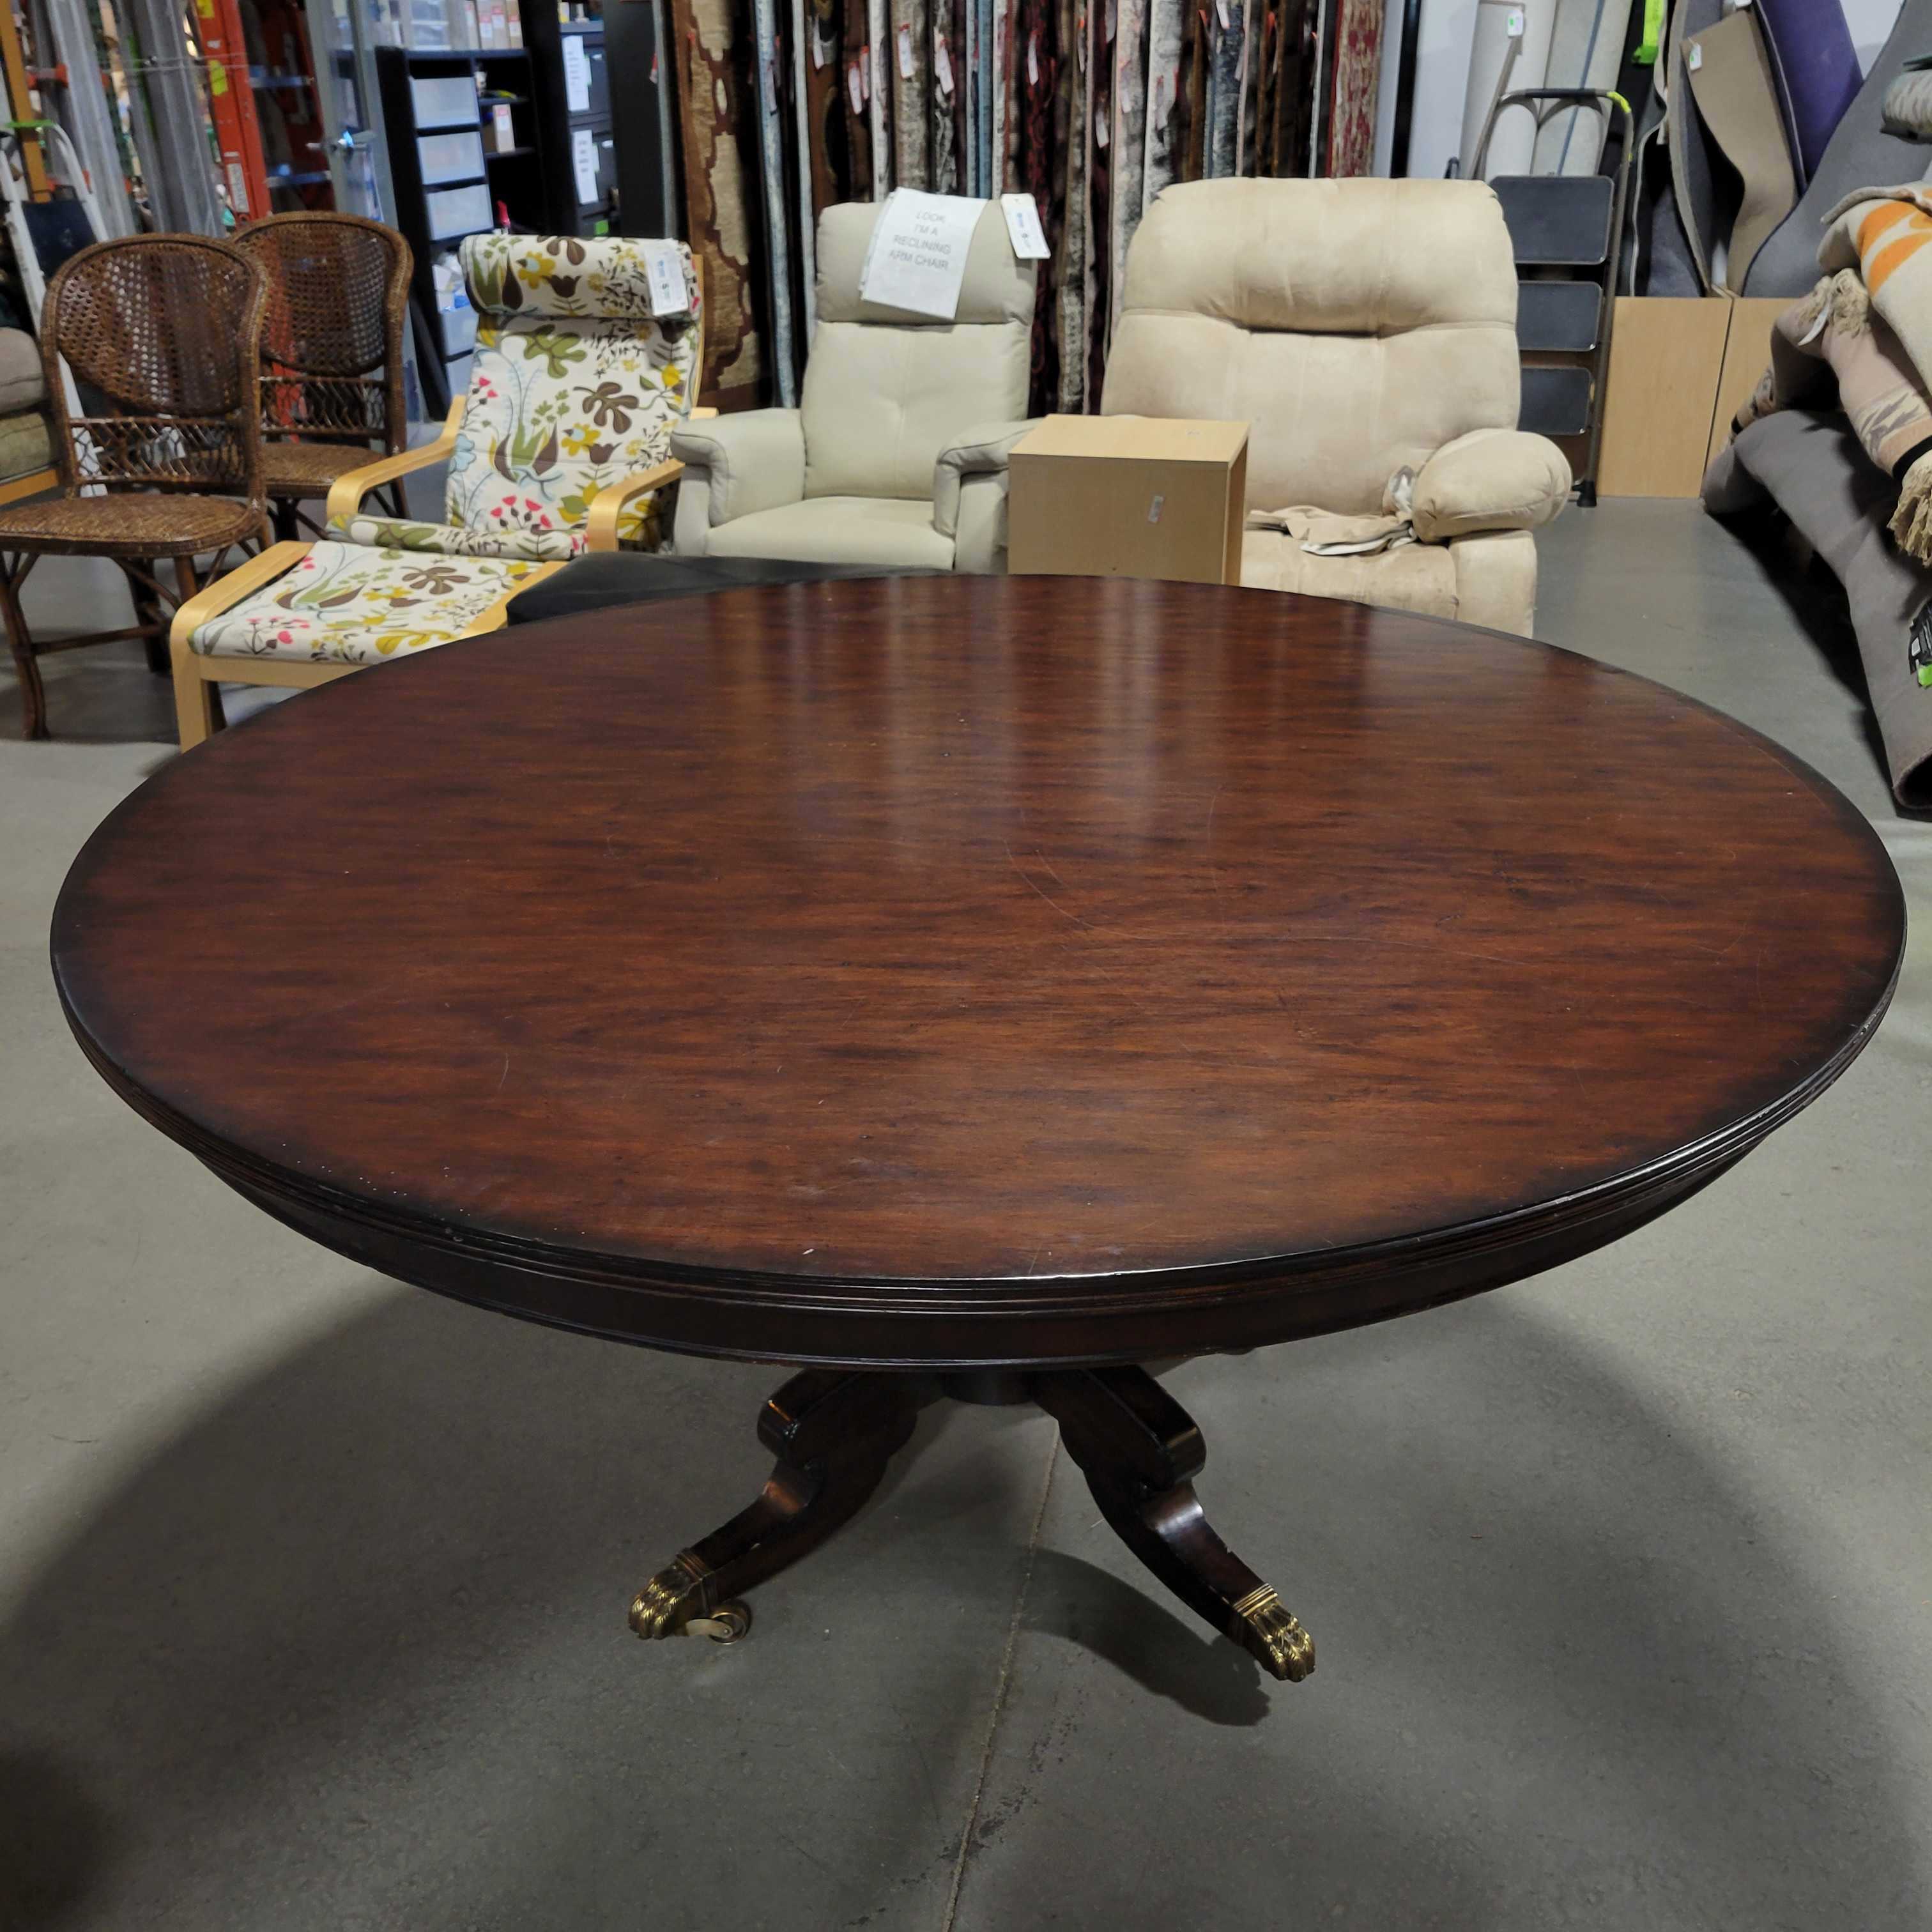 Ralph Lauren Round Mahogany Pedestal Brass Claw Casters Dining Table